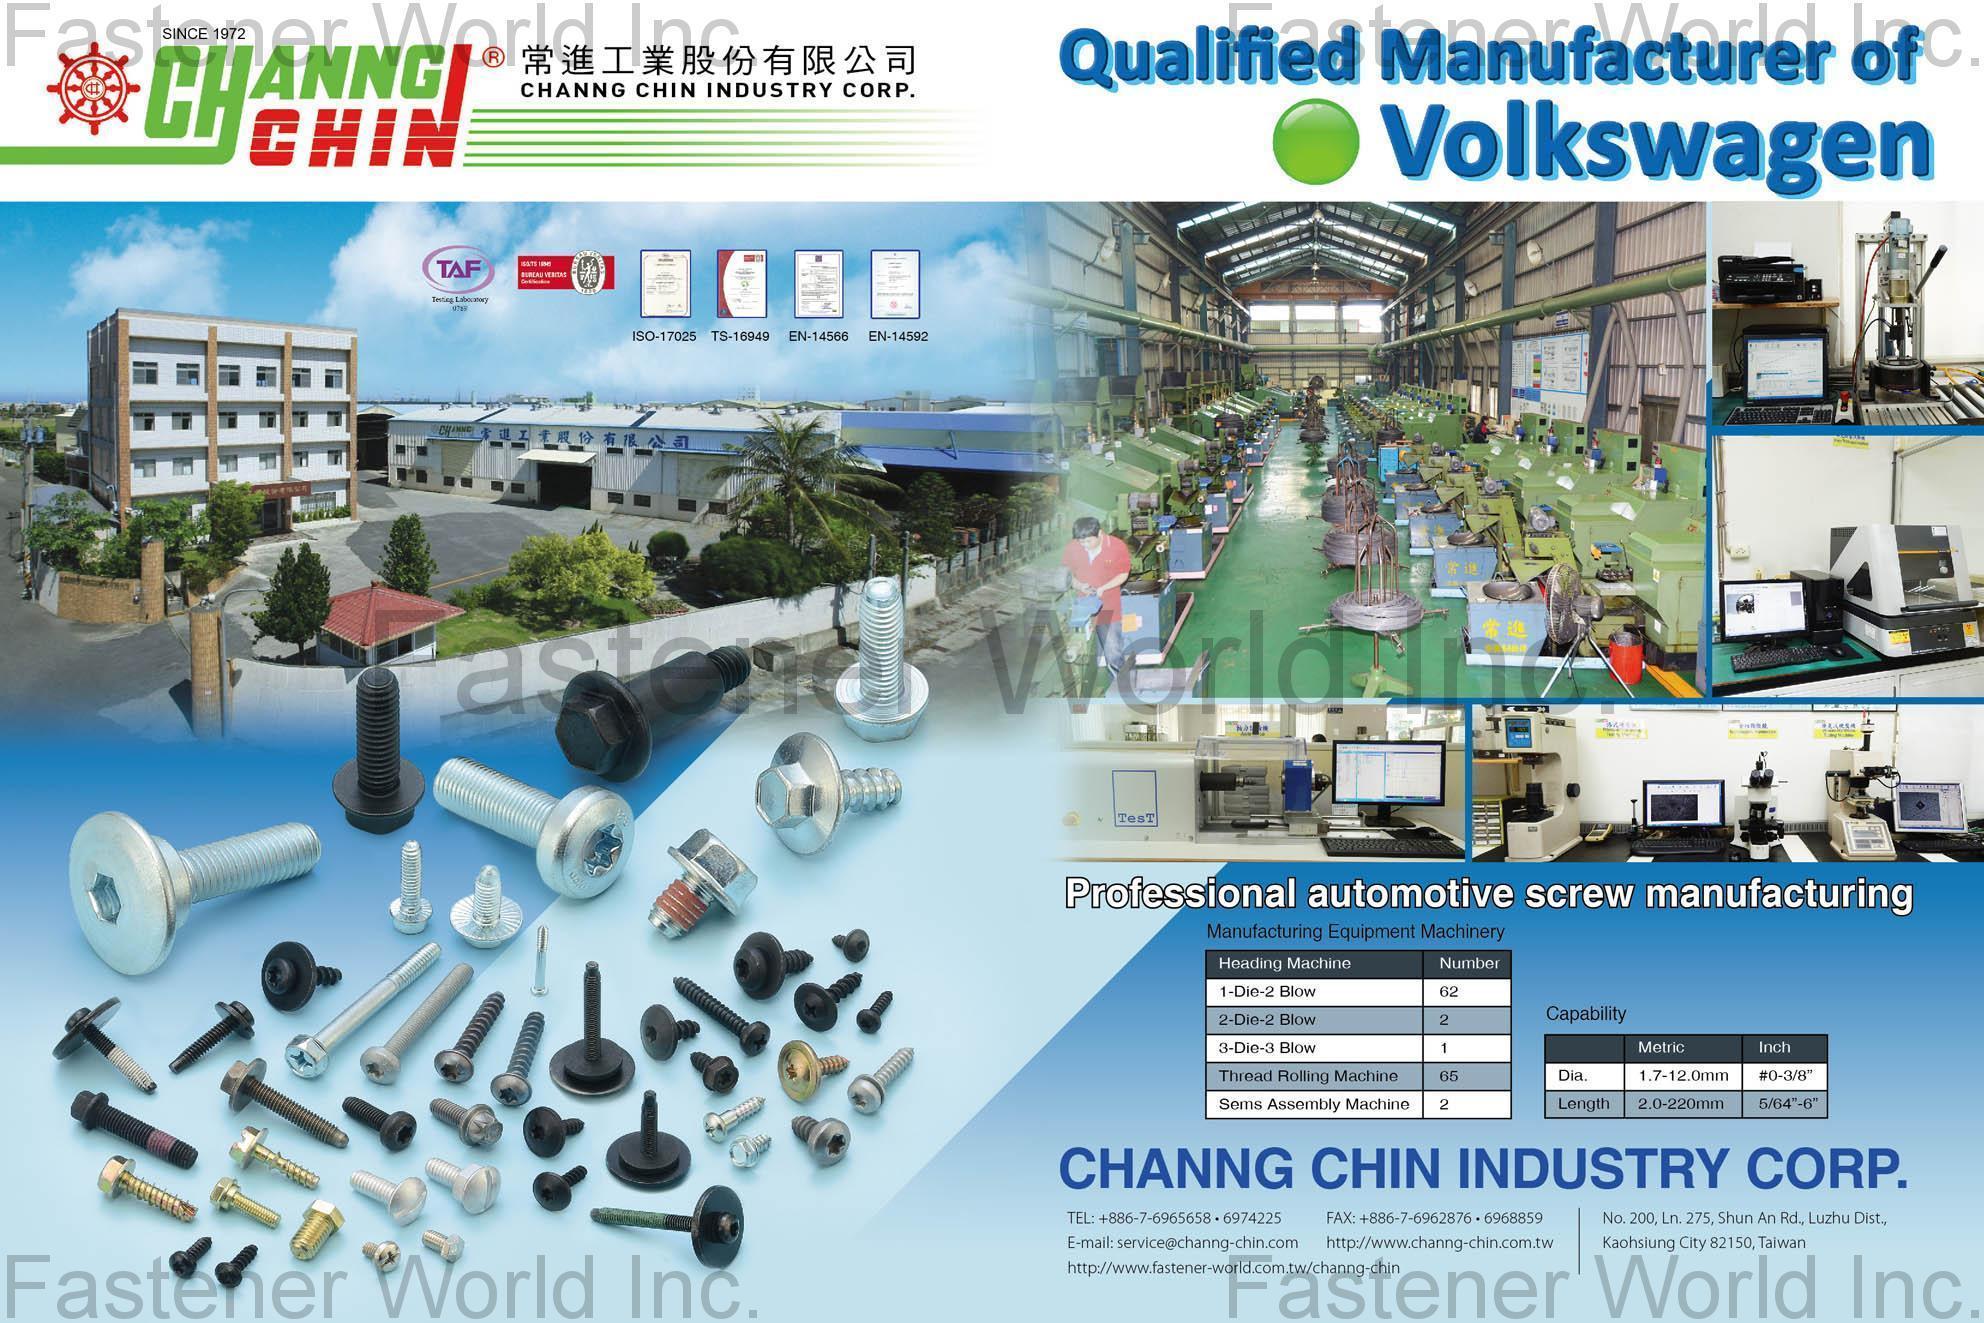 CHANNG CHIN INDUSTRY CORP.  , Auto parts, Special parts, Terminal Screw, Micro Screws, Sems Screw, Special reverse threads, cutting notch design, Good performance for ACQ , Automotive Parts